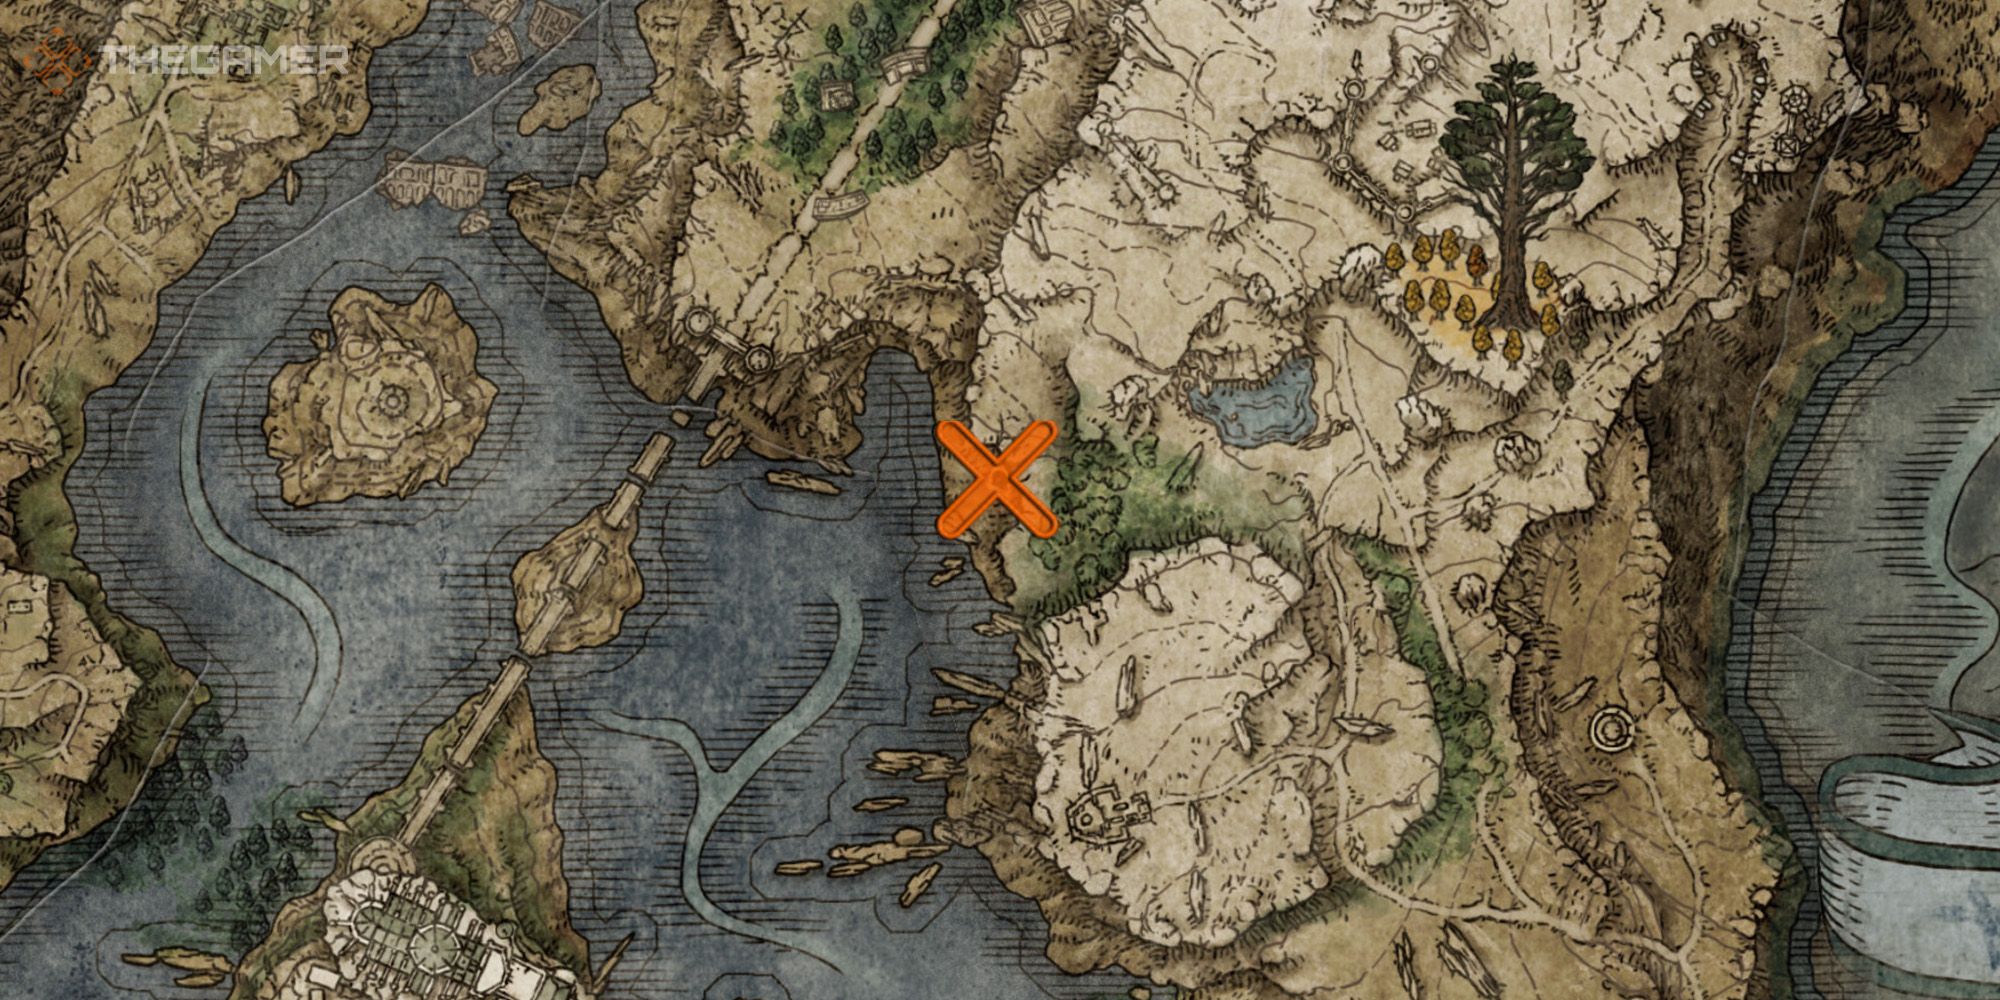 Map showing the location of the Shatter Earth Sorcery in Elden Ring